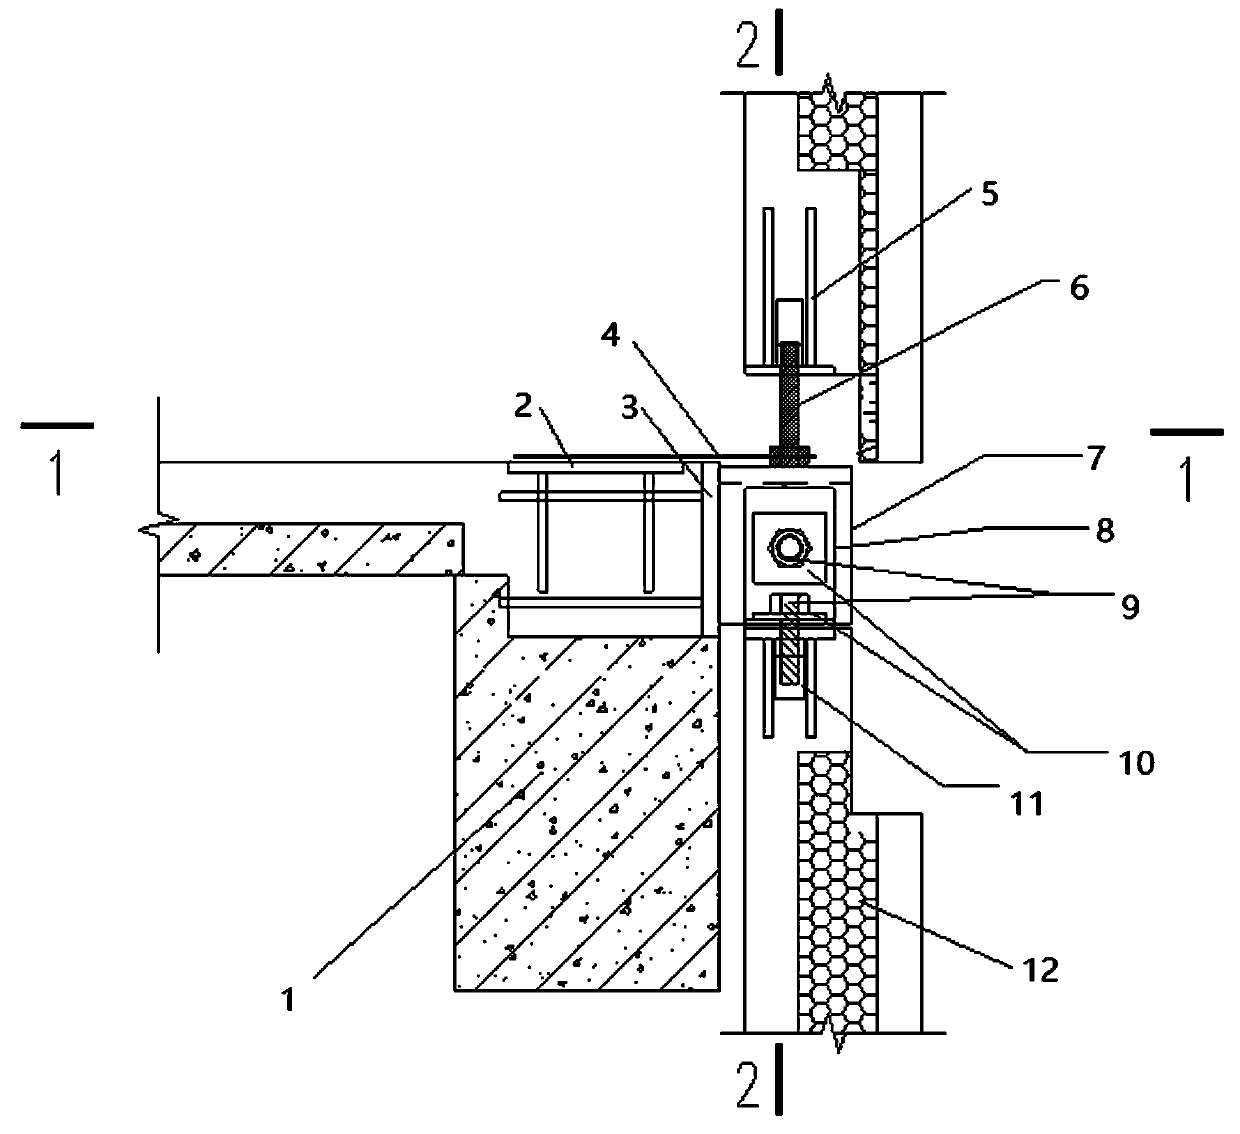 PC externally-hung wallboard connecting structure and mounting method of PC externally-hung wallboards